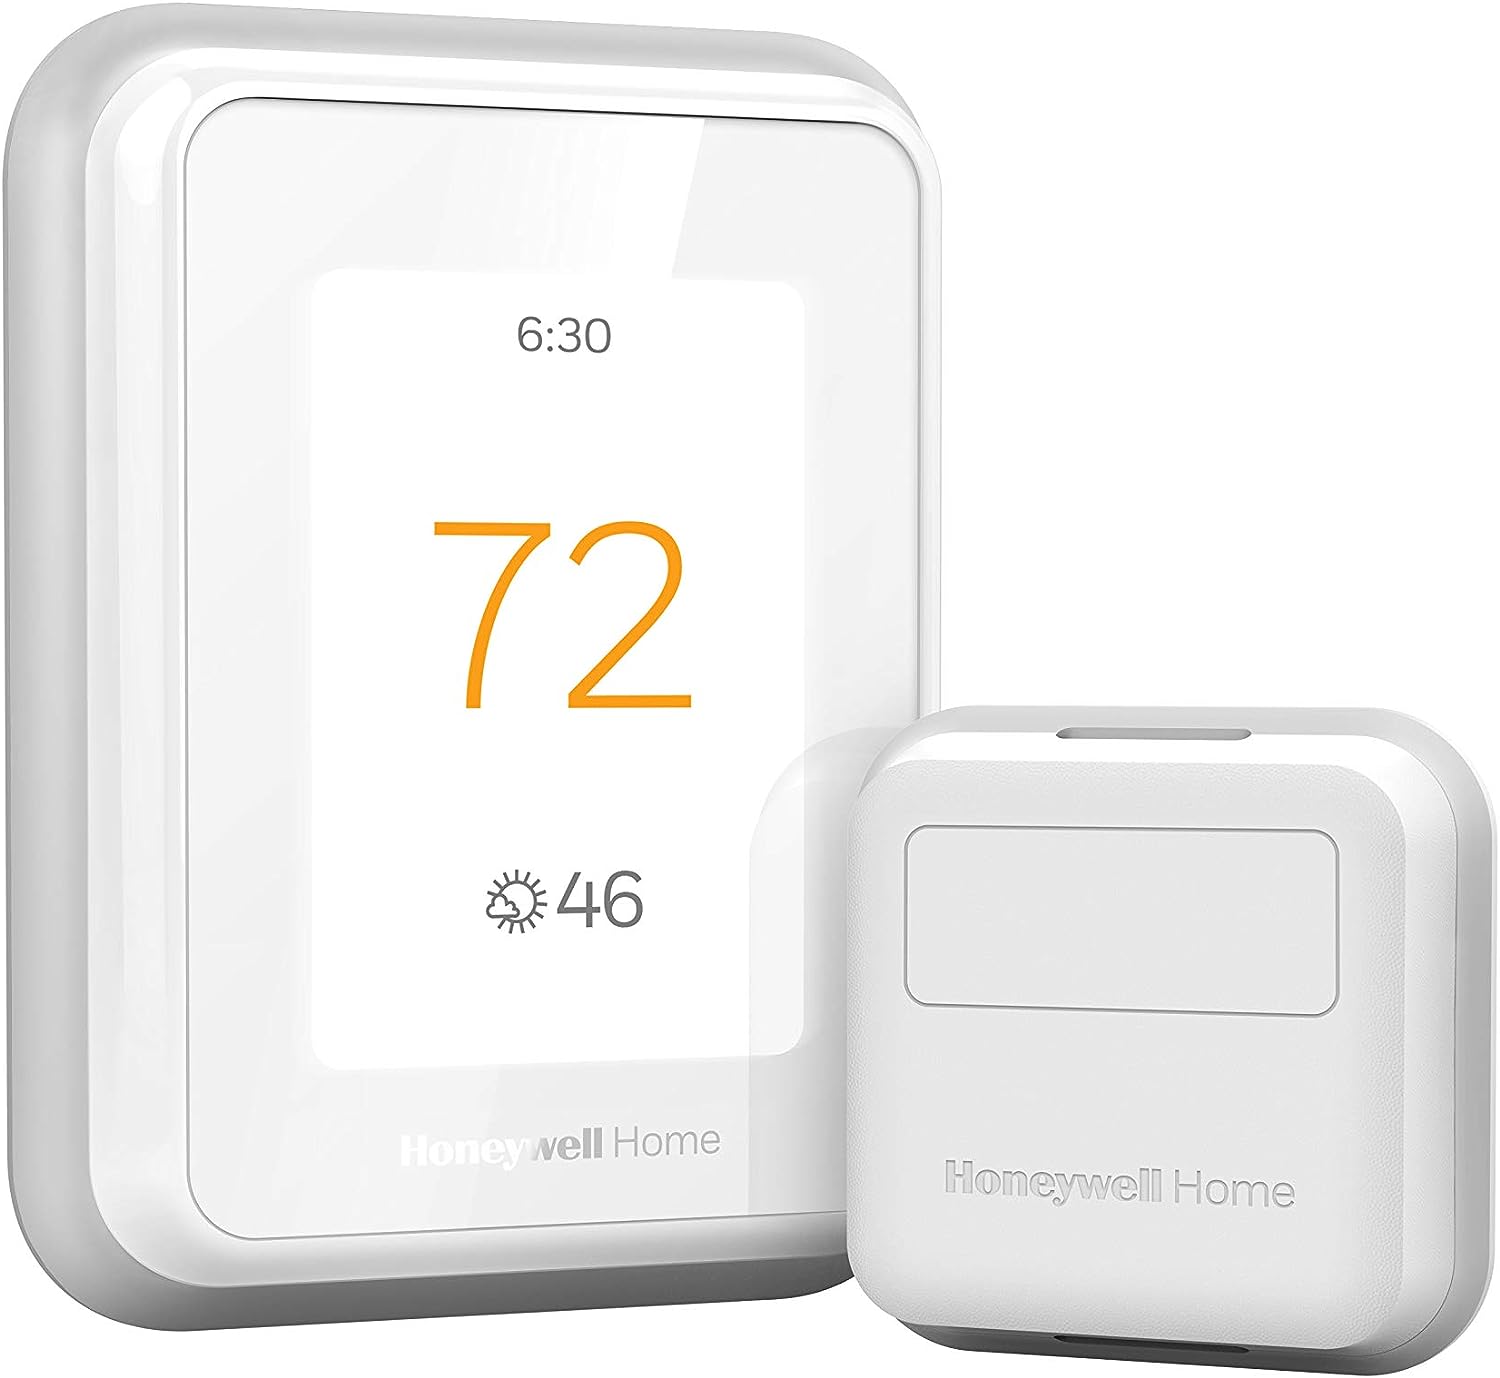 Honeywell Home T9 WiFi Smart Thermostat with 1 Smart Room Sensor, Touchscreen Display $139.99